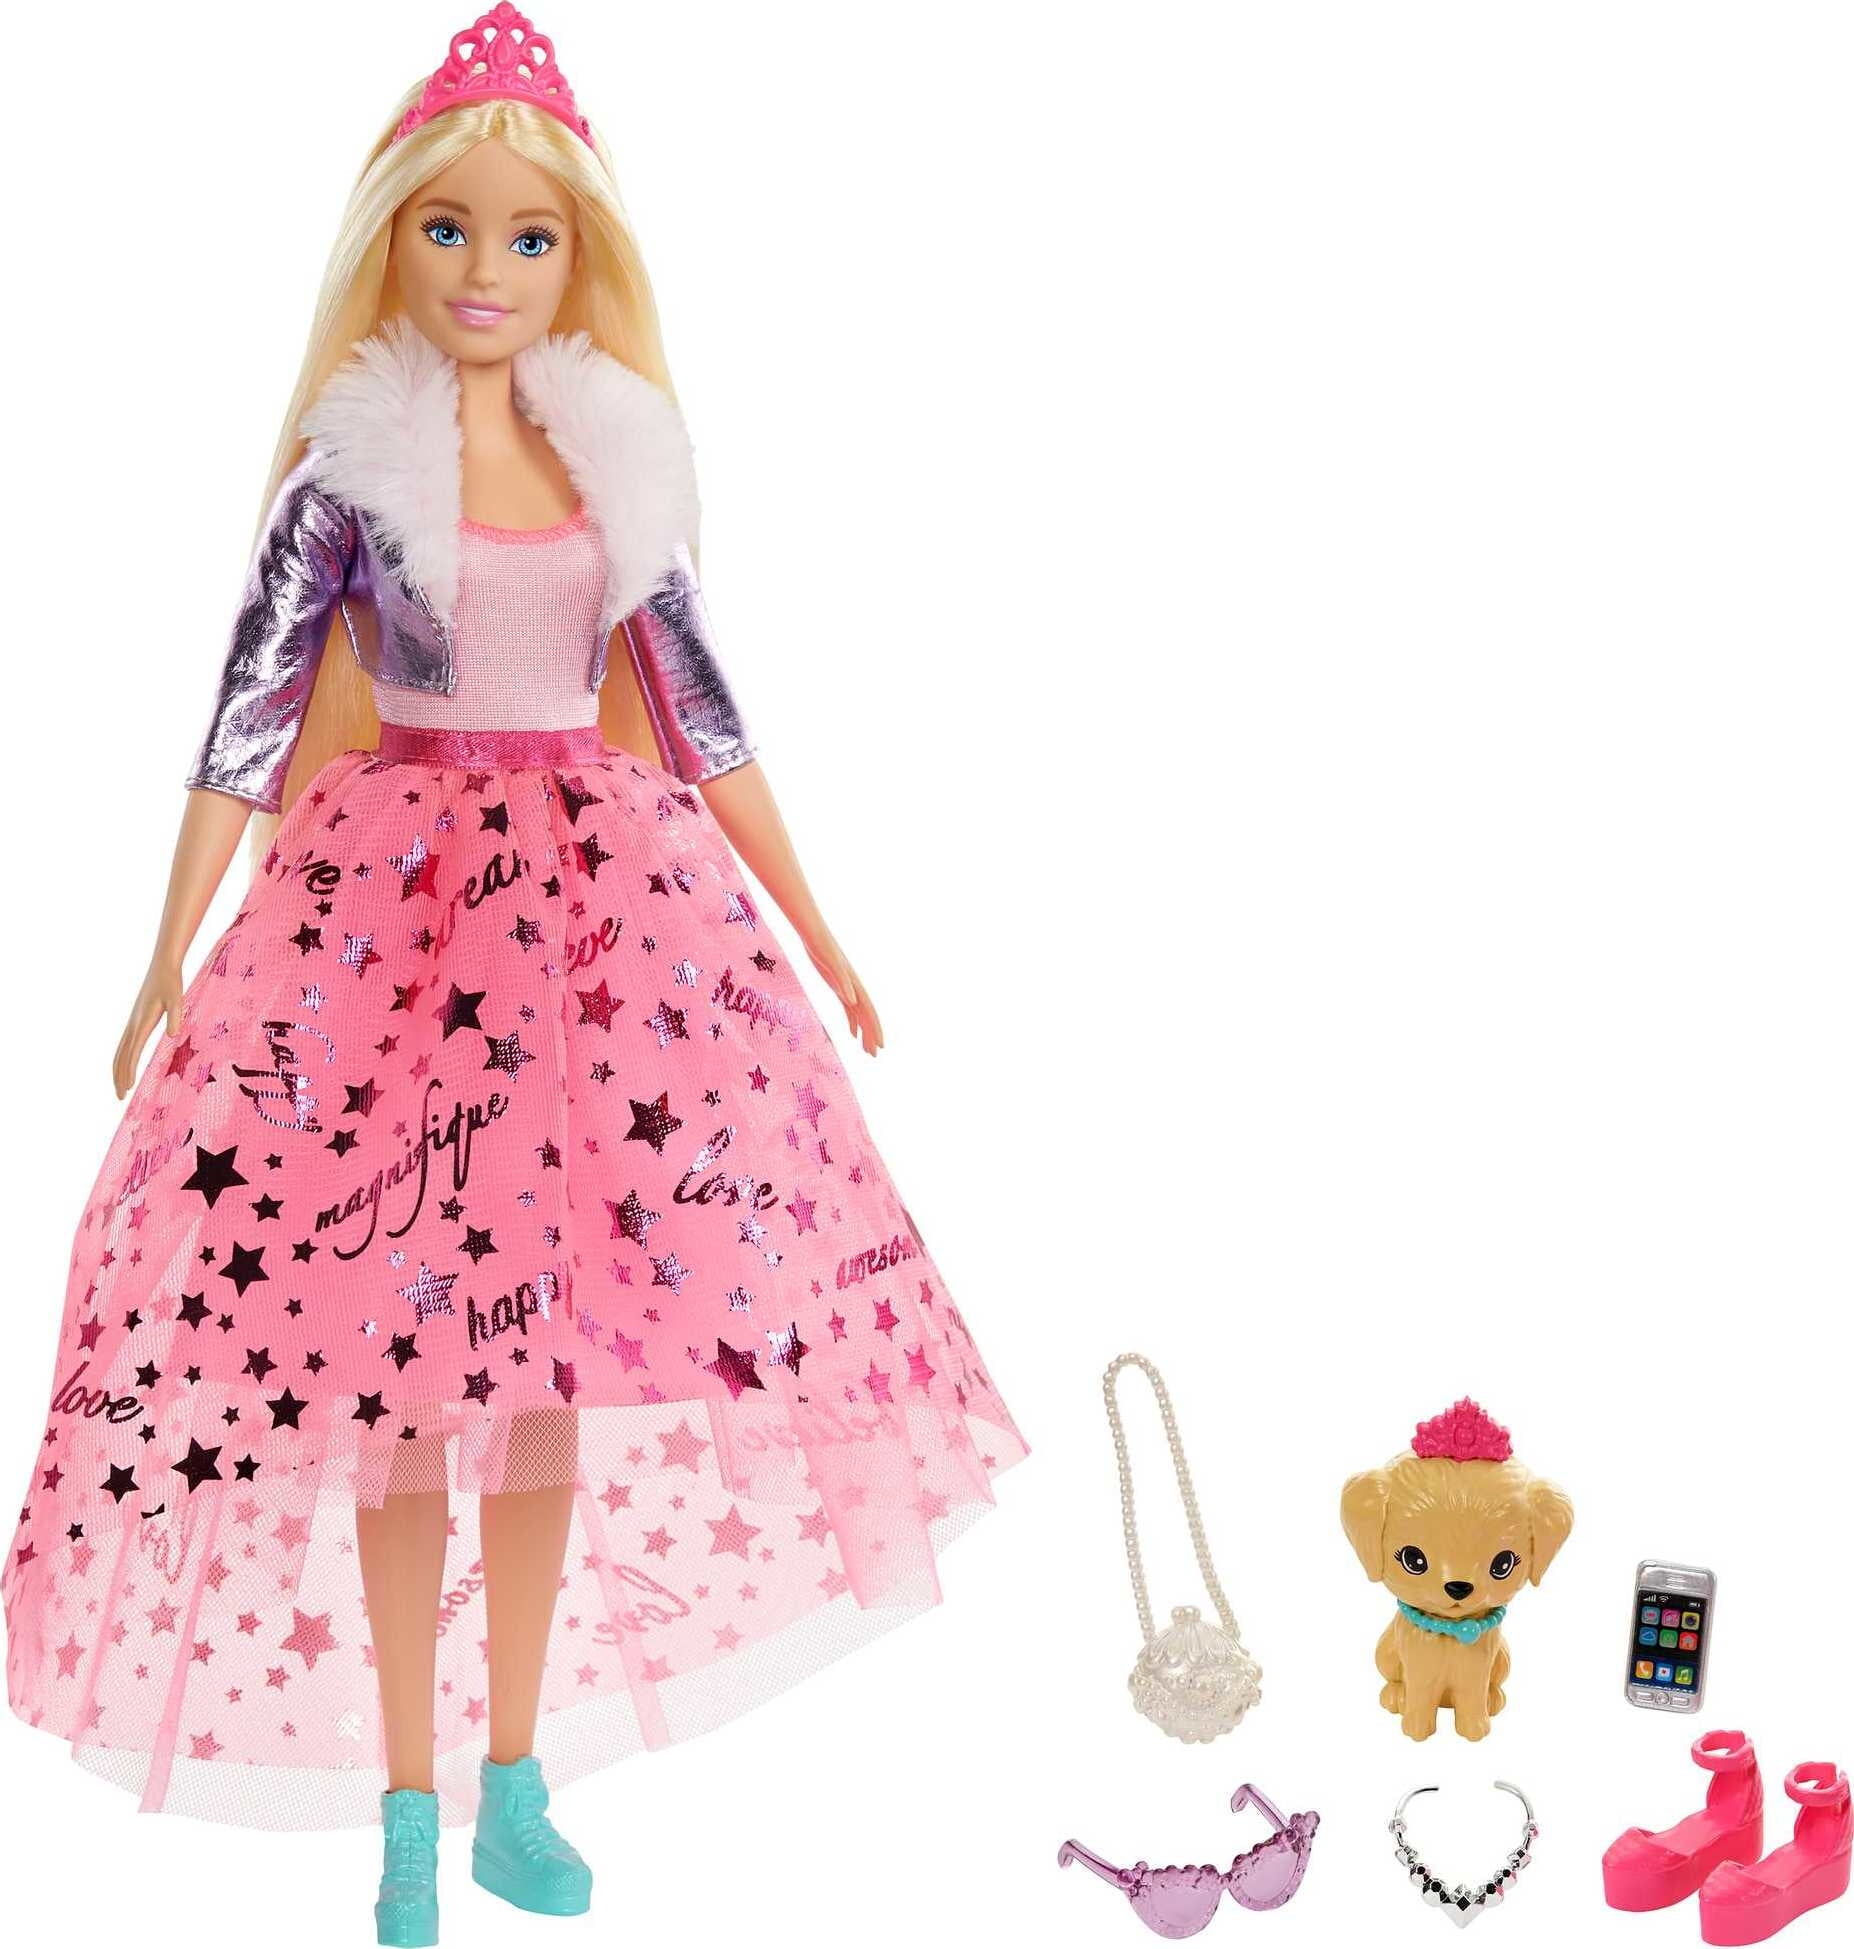 spion Onbepaald sociaal Barbie Dreamtopia Doll & Accessories, Blonde Doll with Star Skirt, Pet  Puppy & Fashion Accessories - Walmart.com